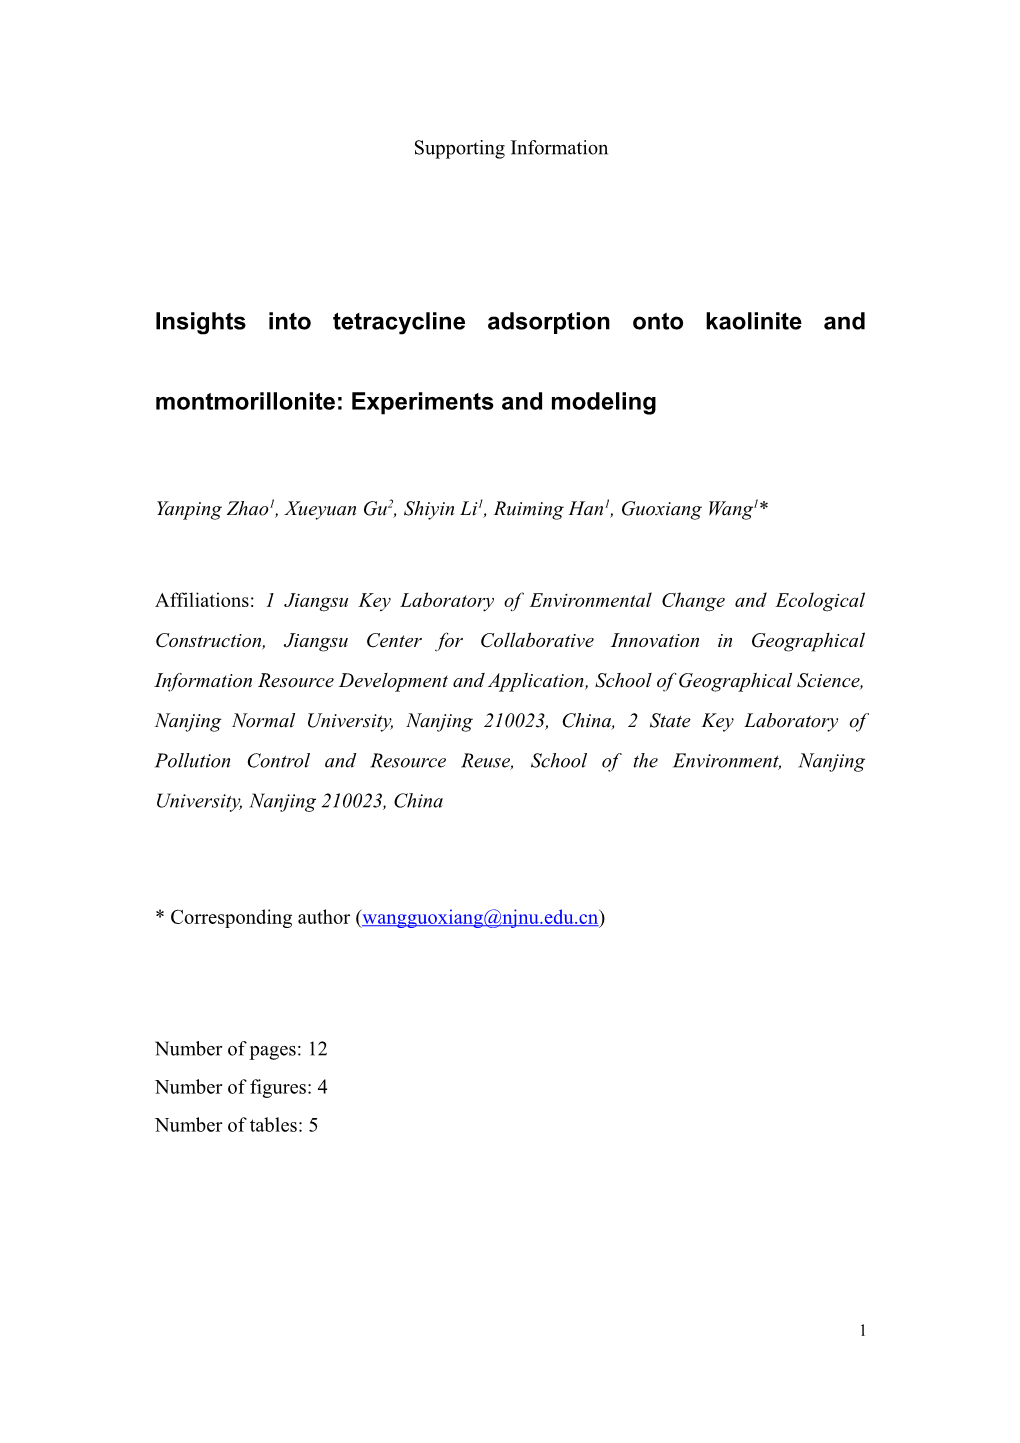 Insights Into Tetracycline Adsorption Onto Kaolinite and Montmorillonite: Experiments